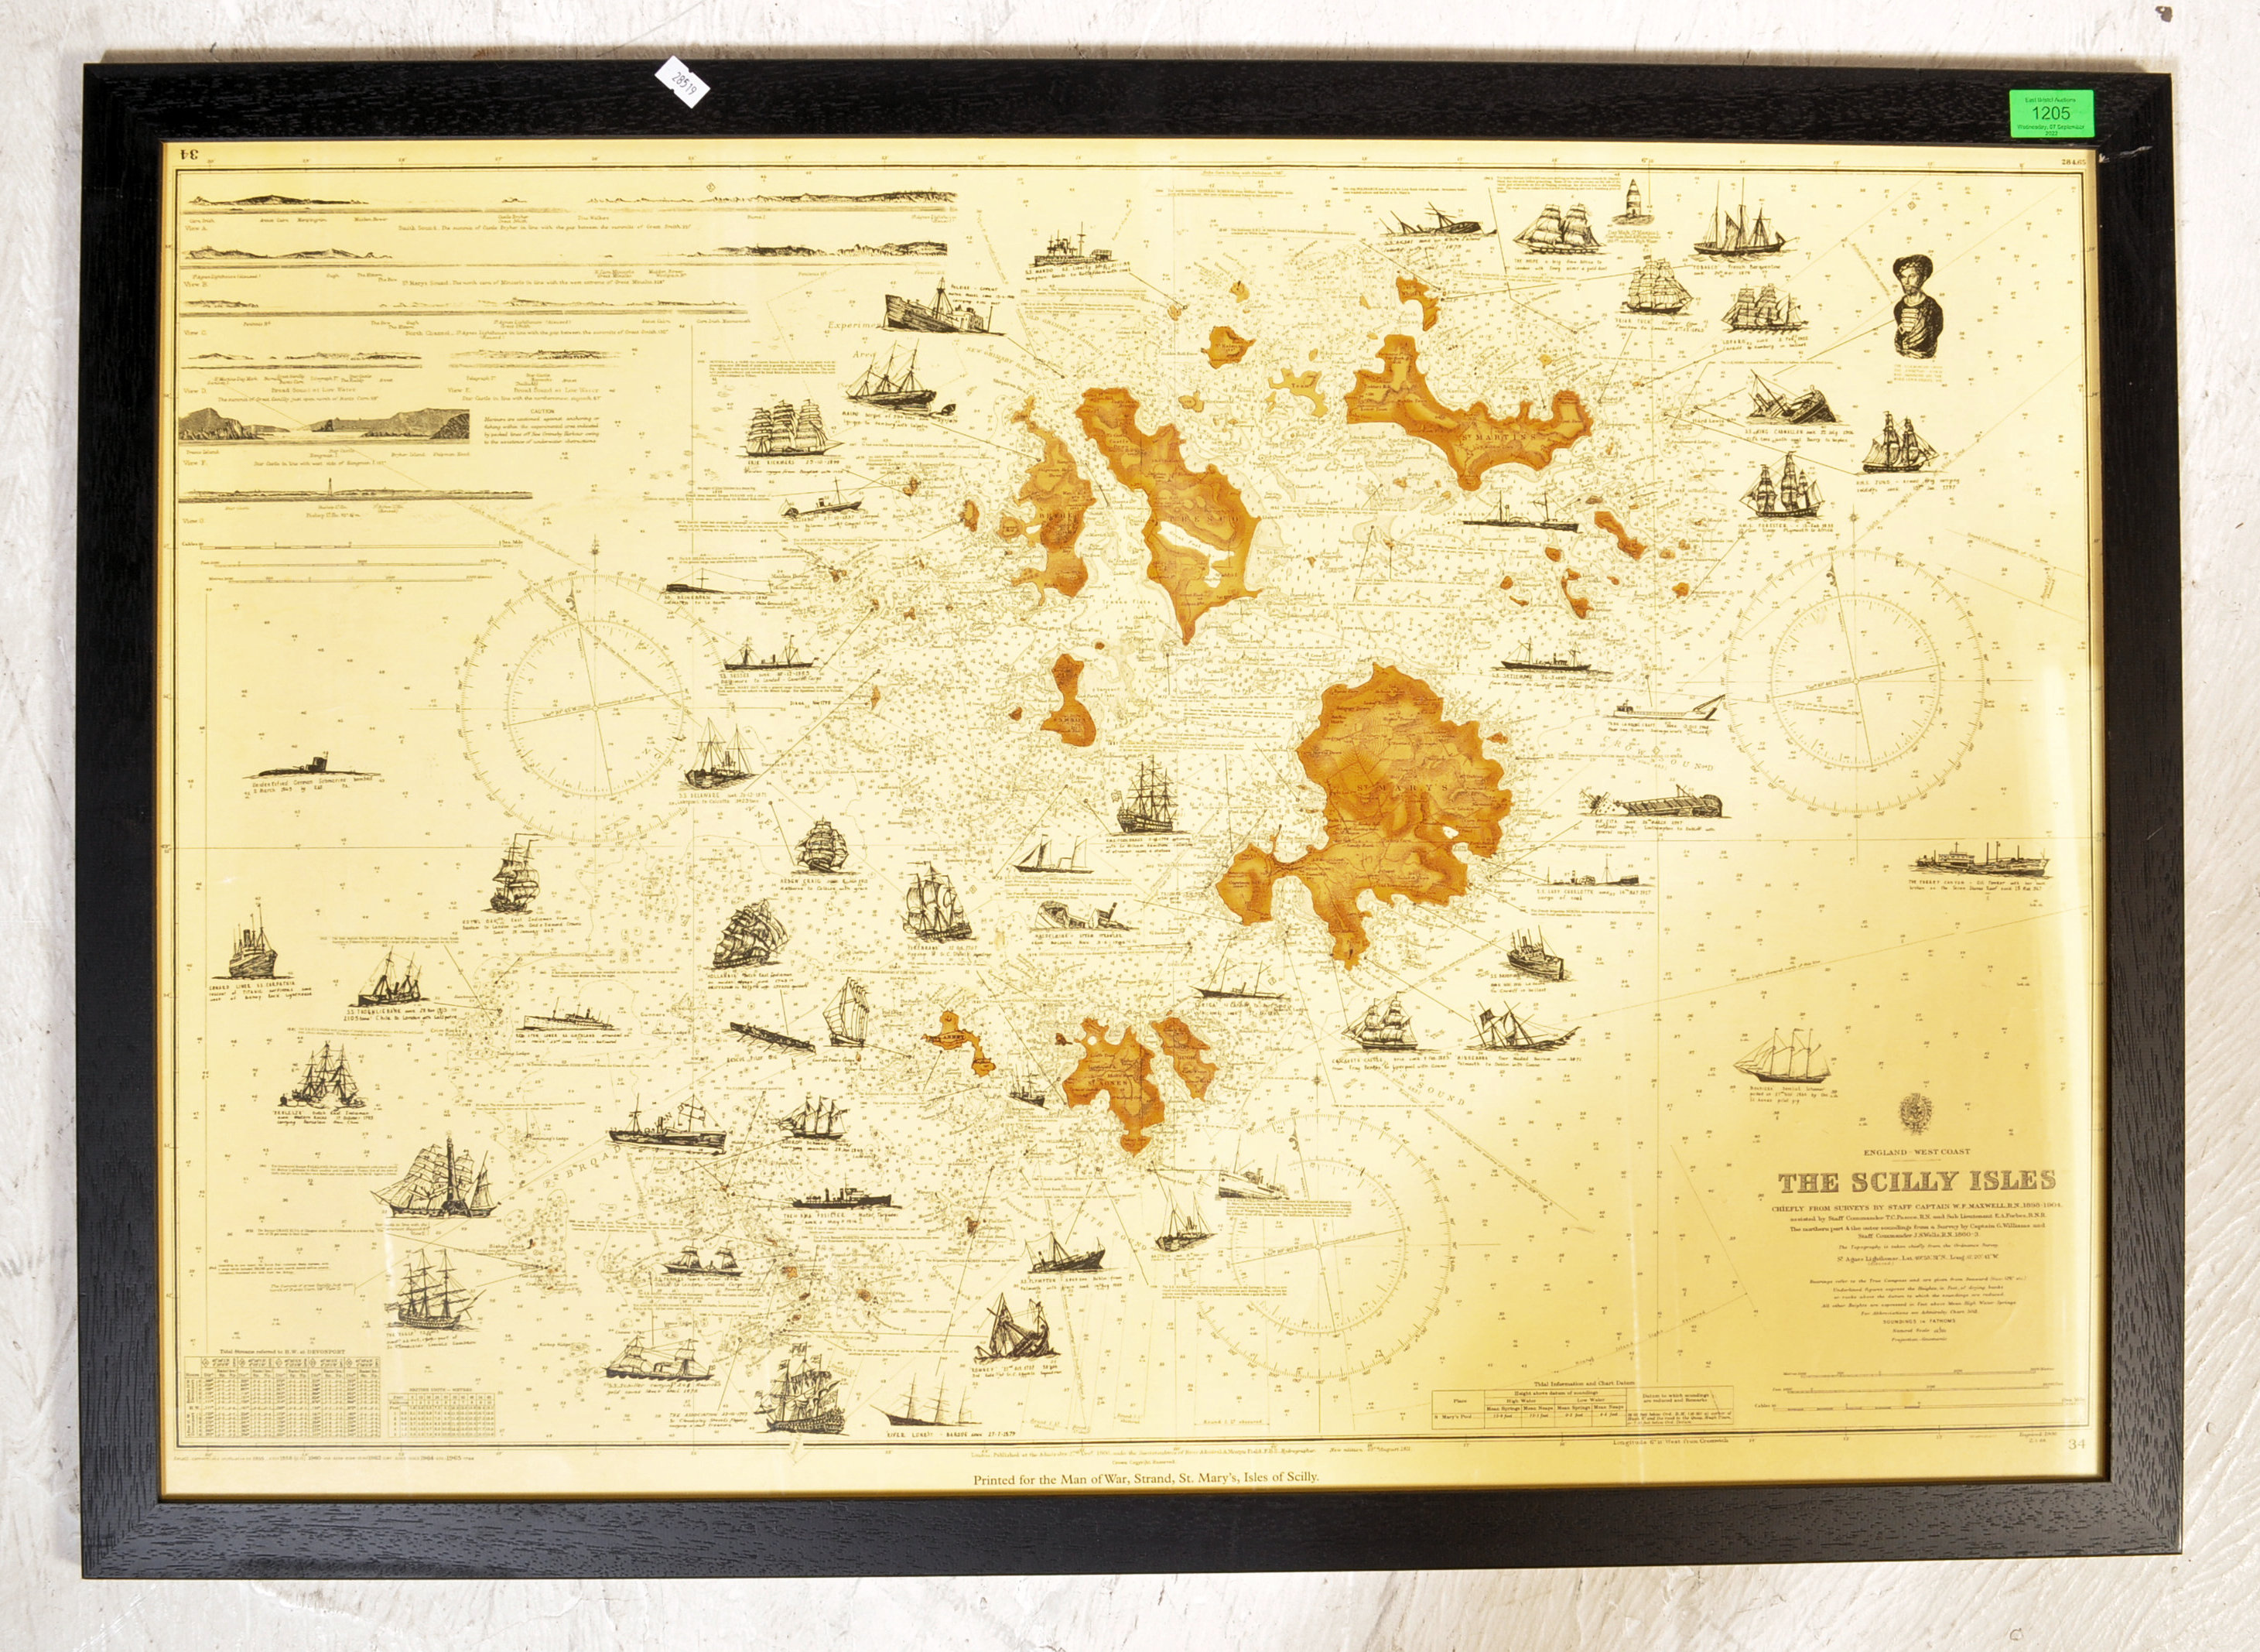 THE SCILLY ISLES - PRINTED SURVEY'S MAP - Image 2 of 5